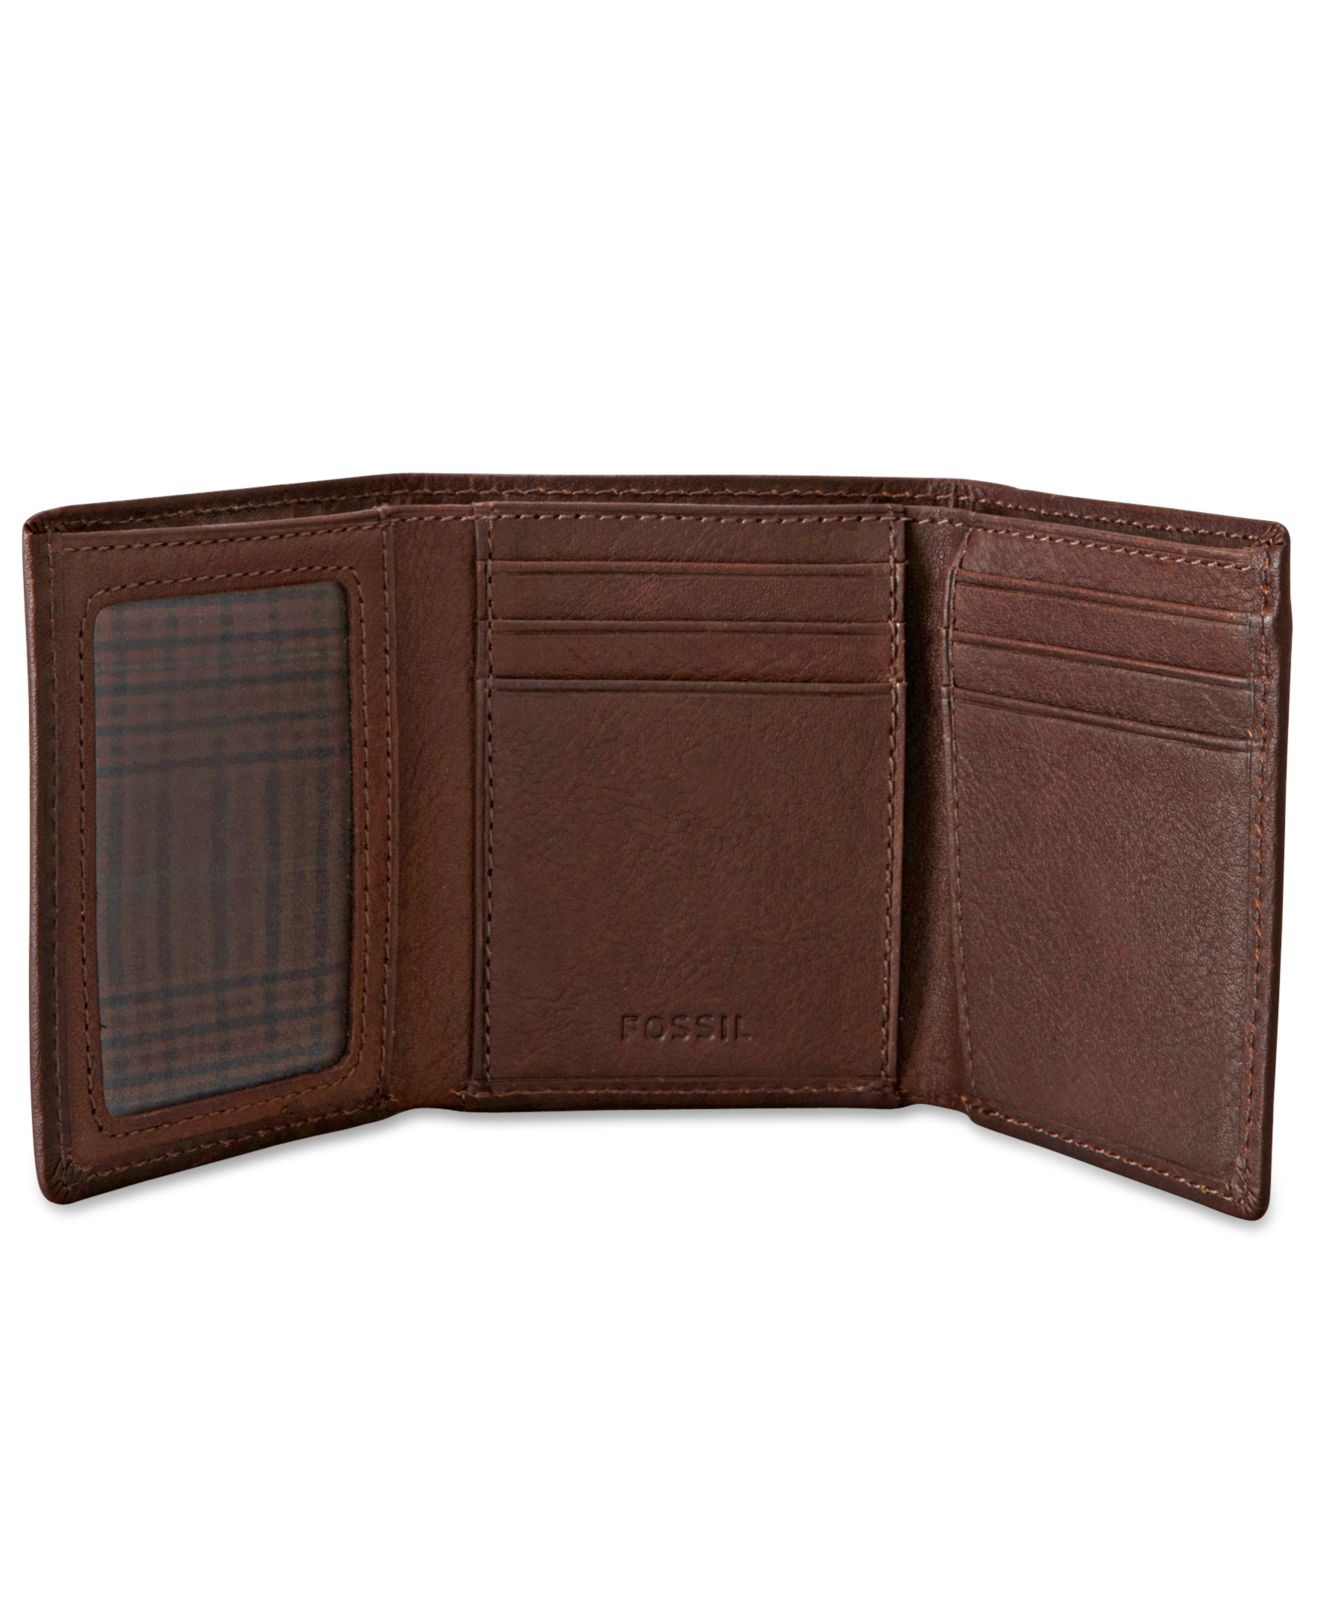 Lyst - Fossil Estate Zip Trifold Wallet in Brown for Men